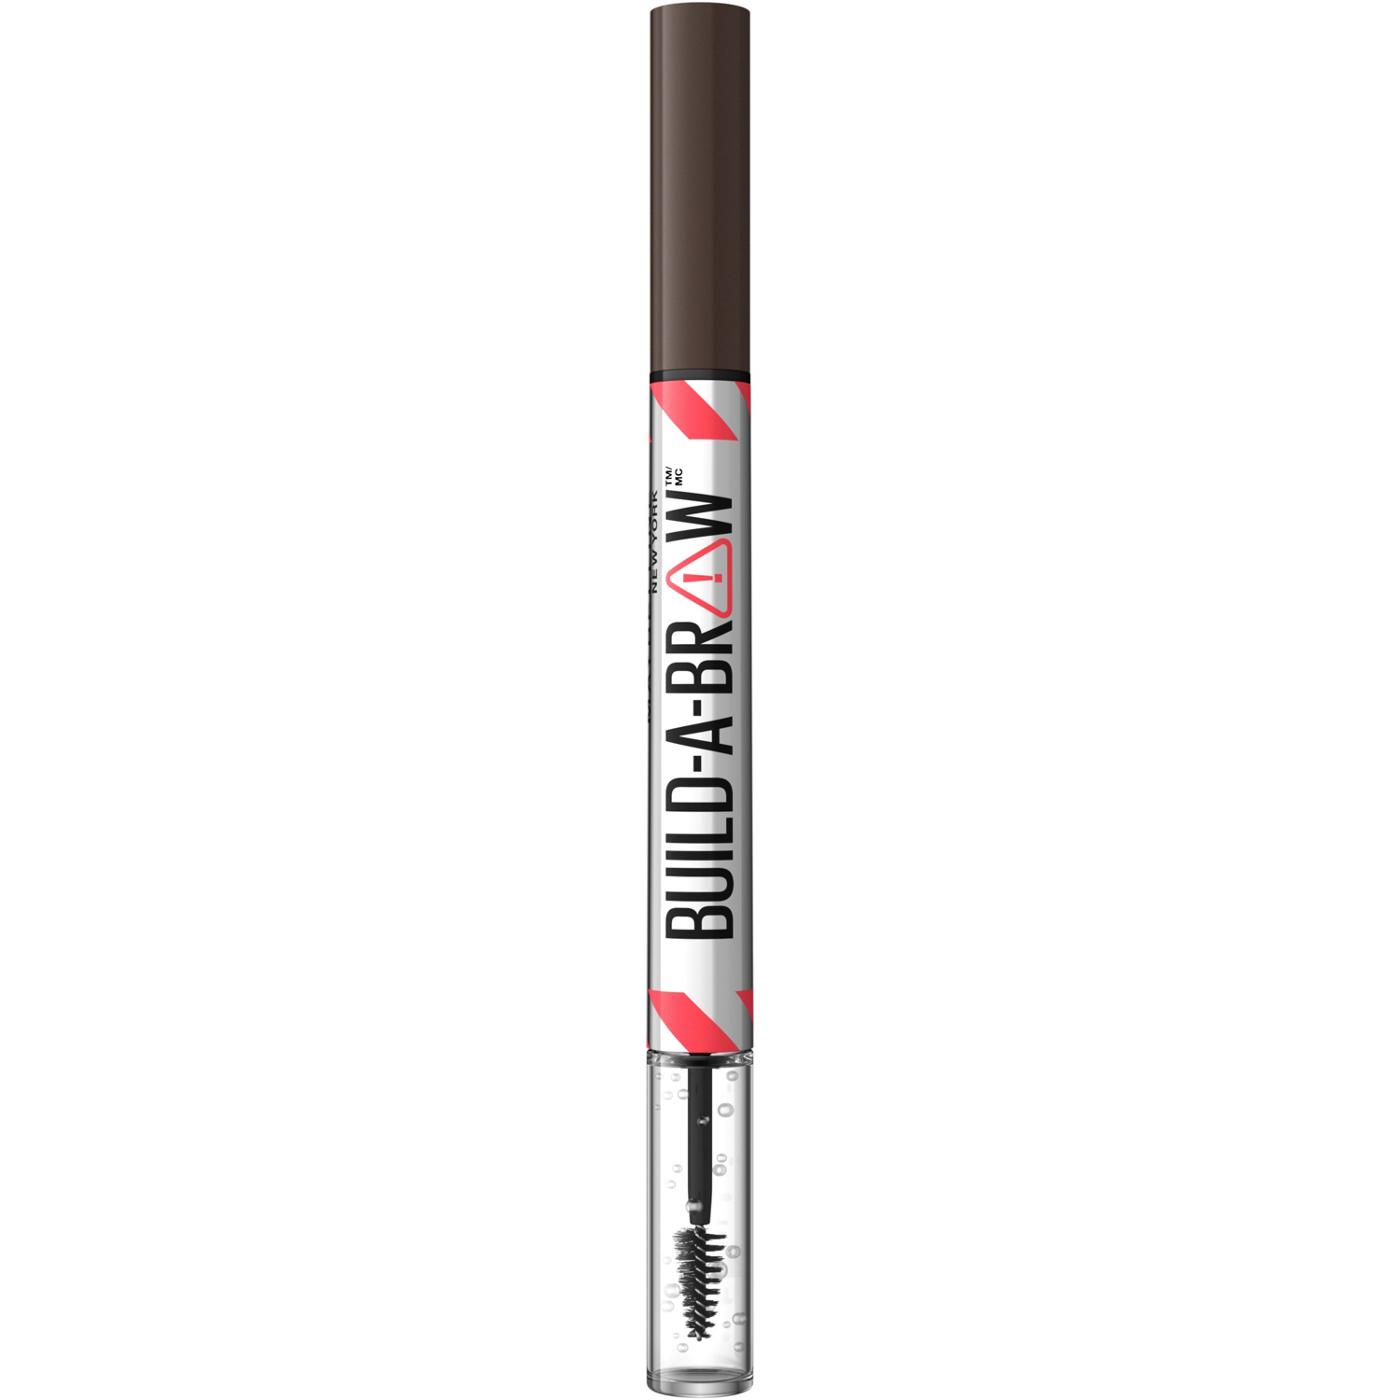 Maybelline Build A Brow 2 In 1 Brow Pen - Deep Brown; image 12 of 17